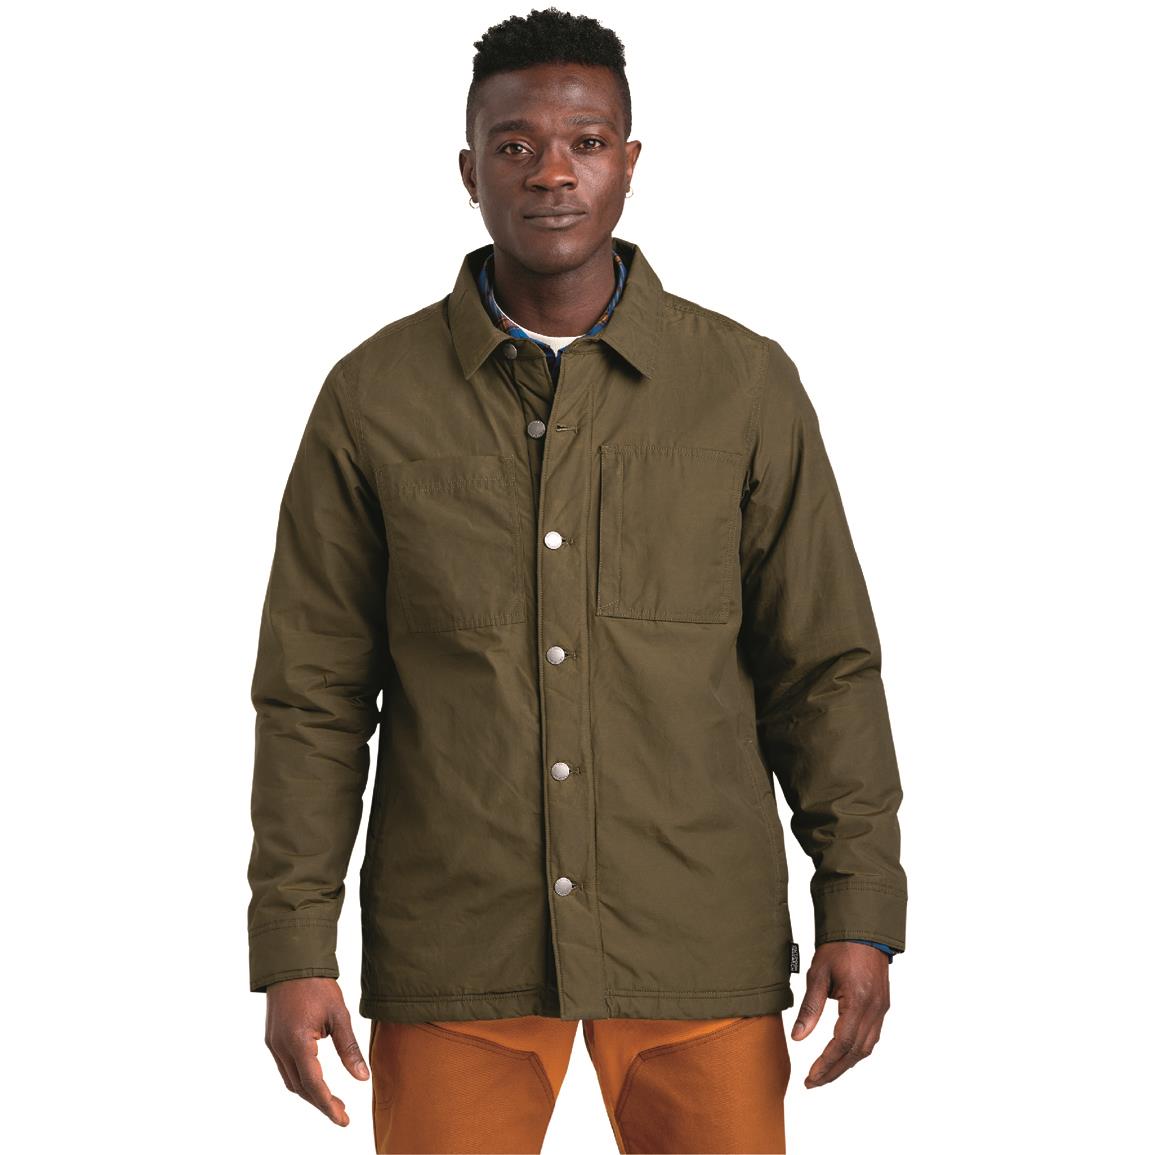 Outdoor Research Men's Lined Chore Jacket, Loden